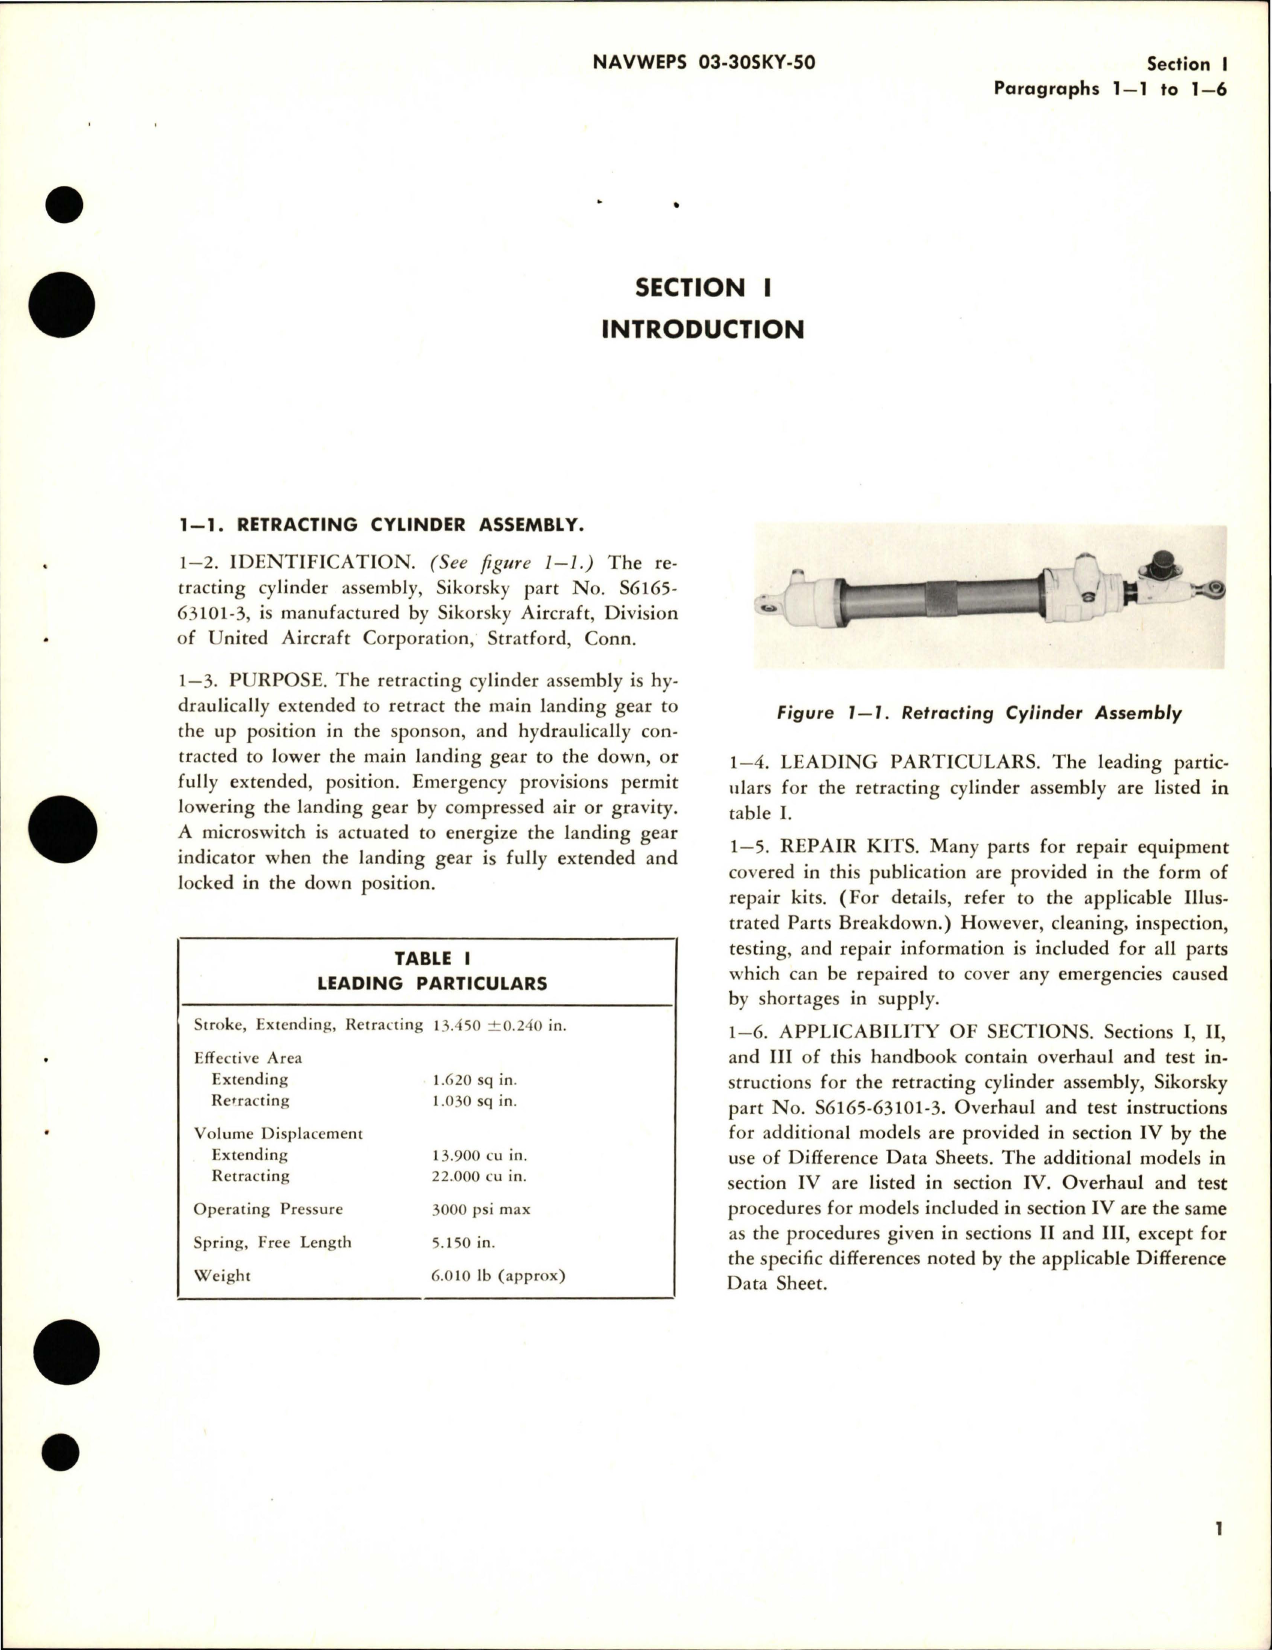 Sample page 5 from AirCorps Library document: Overhaul Instructions for Retracting Cylinder Assembly - Parts S6165-63101-3 and S6165-63101-4